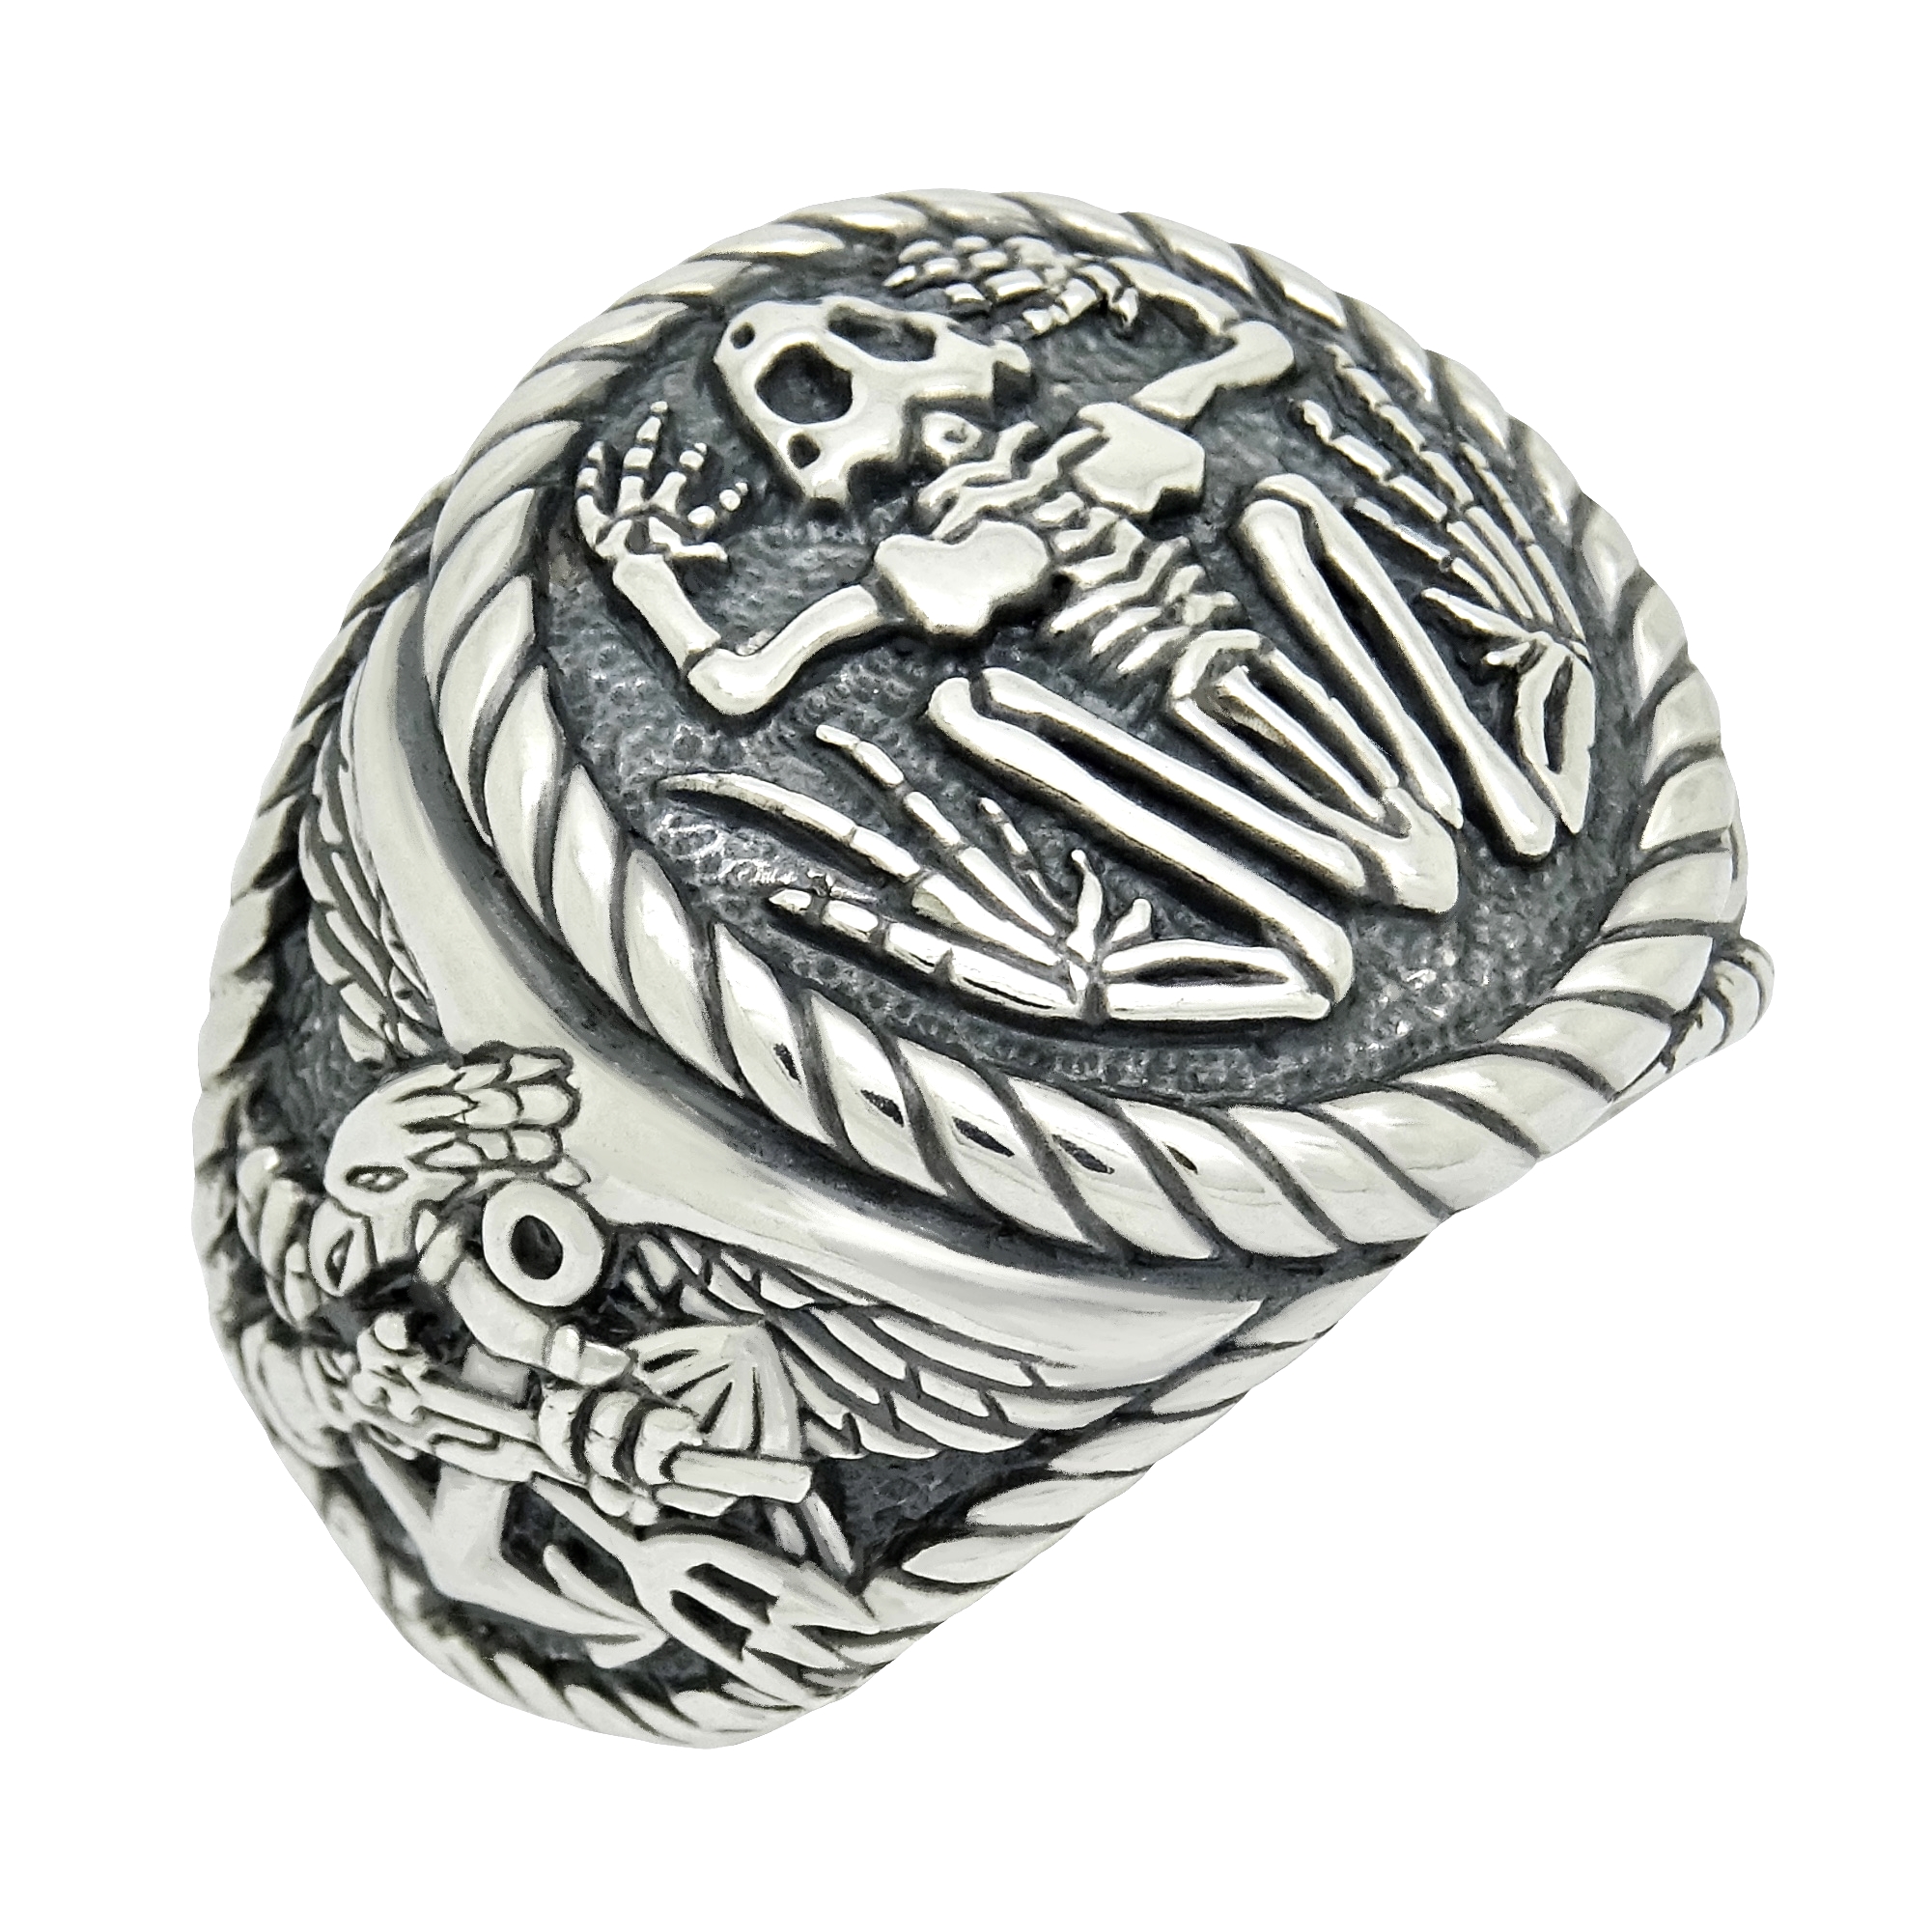 Frogman Combat Diver Navy Seals Scuba Sterling Silver Army Military Police  925 Men Ring